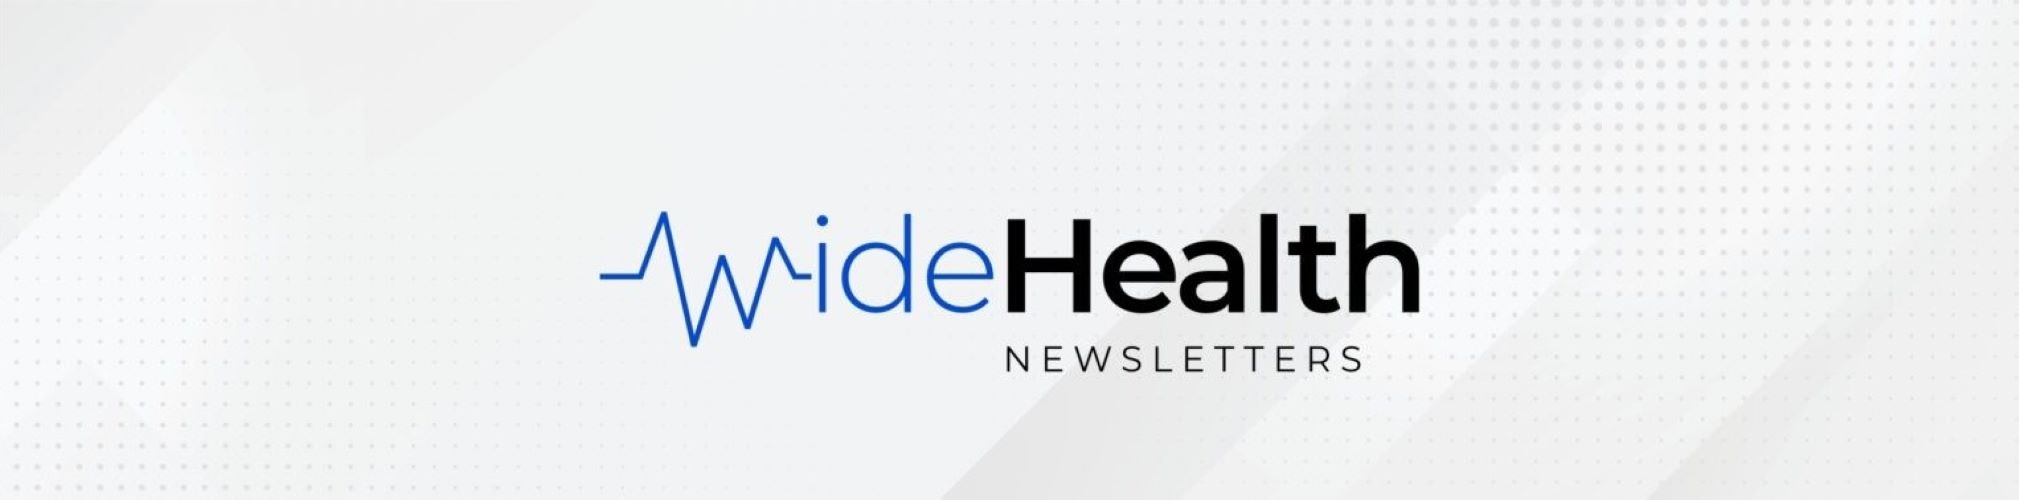 2nd WideHealth Newsletter is available